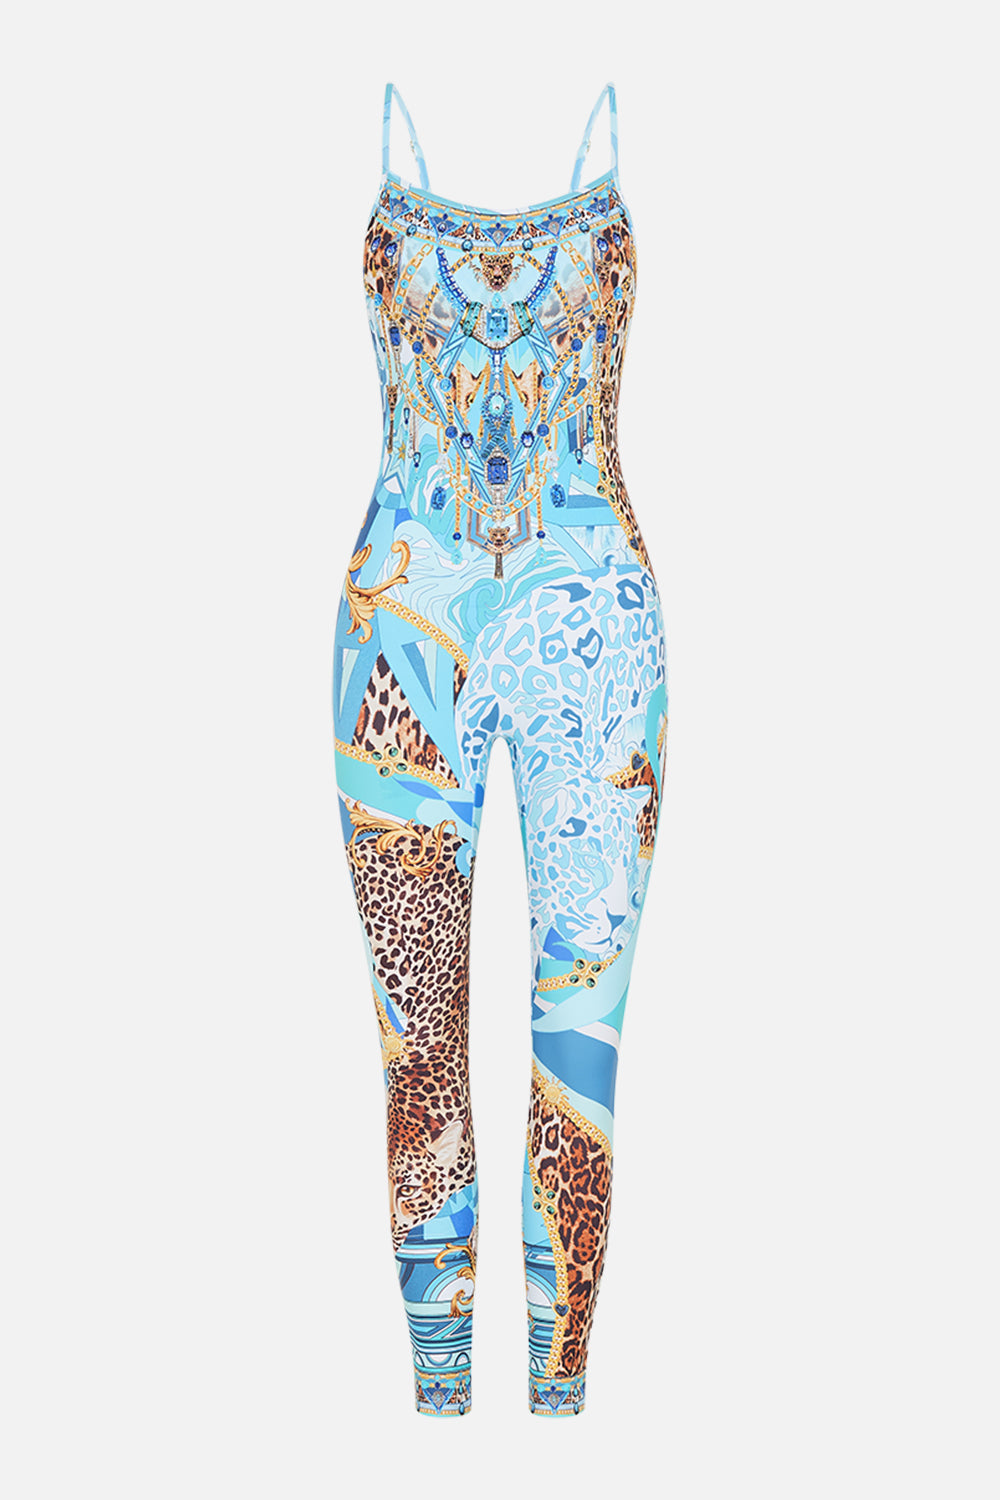 Product view of CAMILLA designer catsuit in Sky Cheetah print